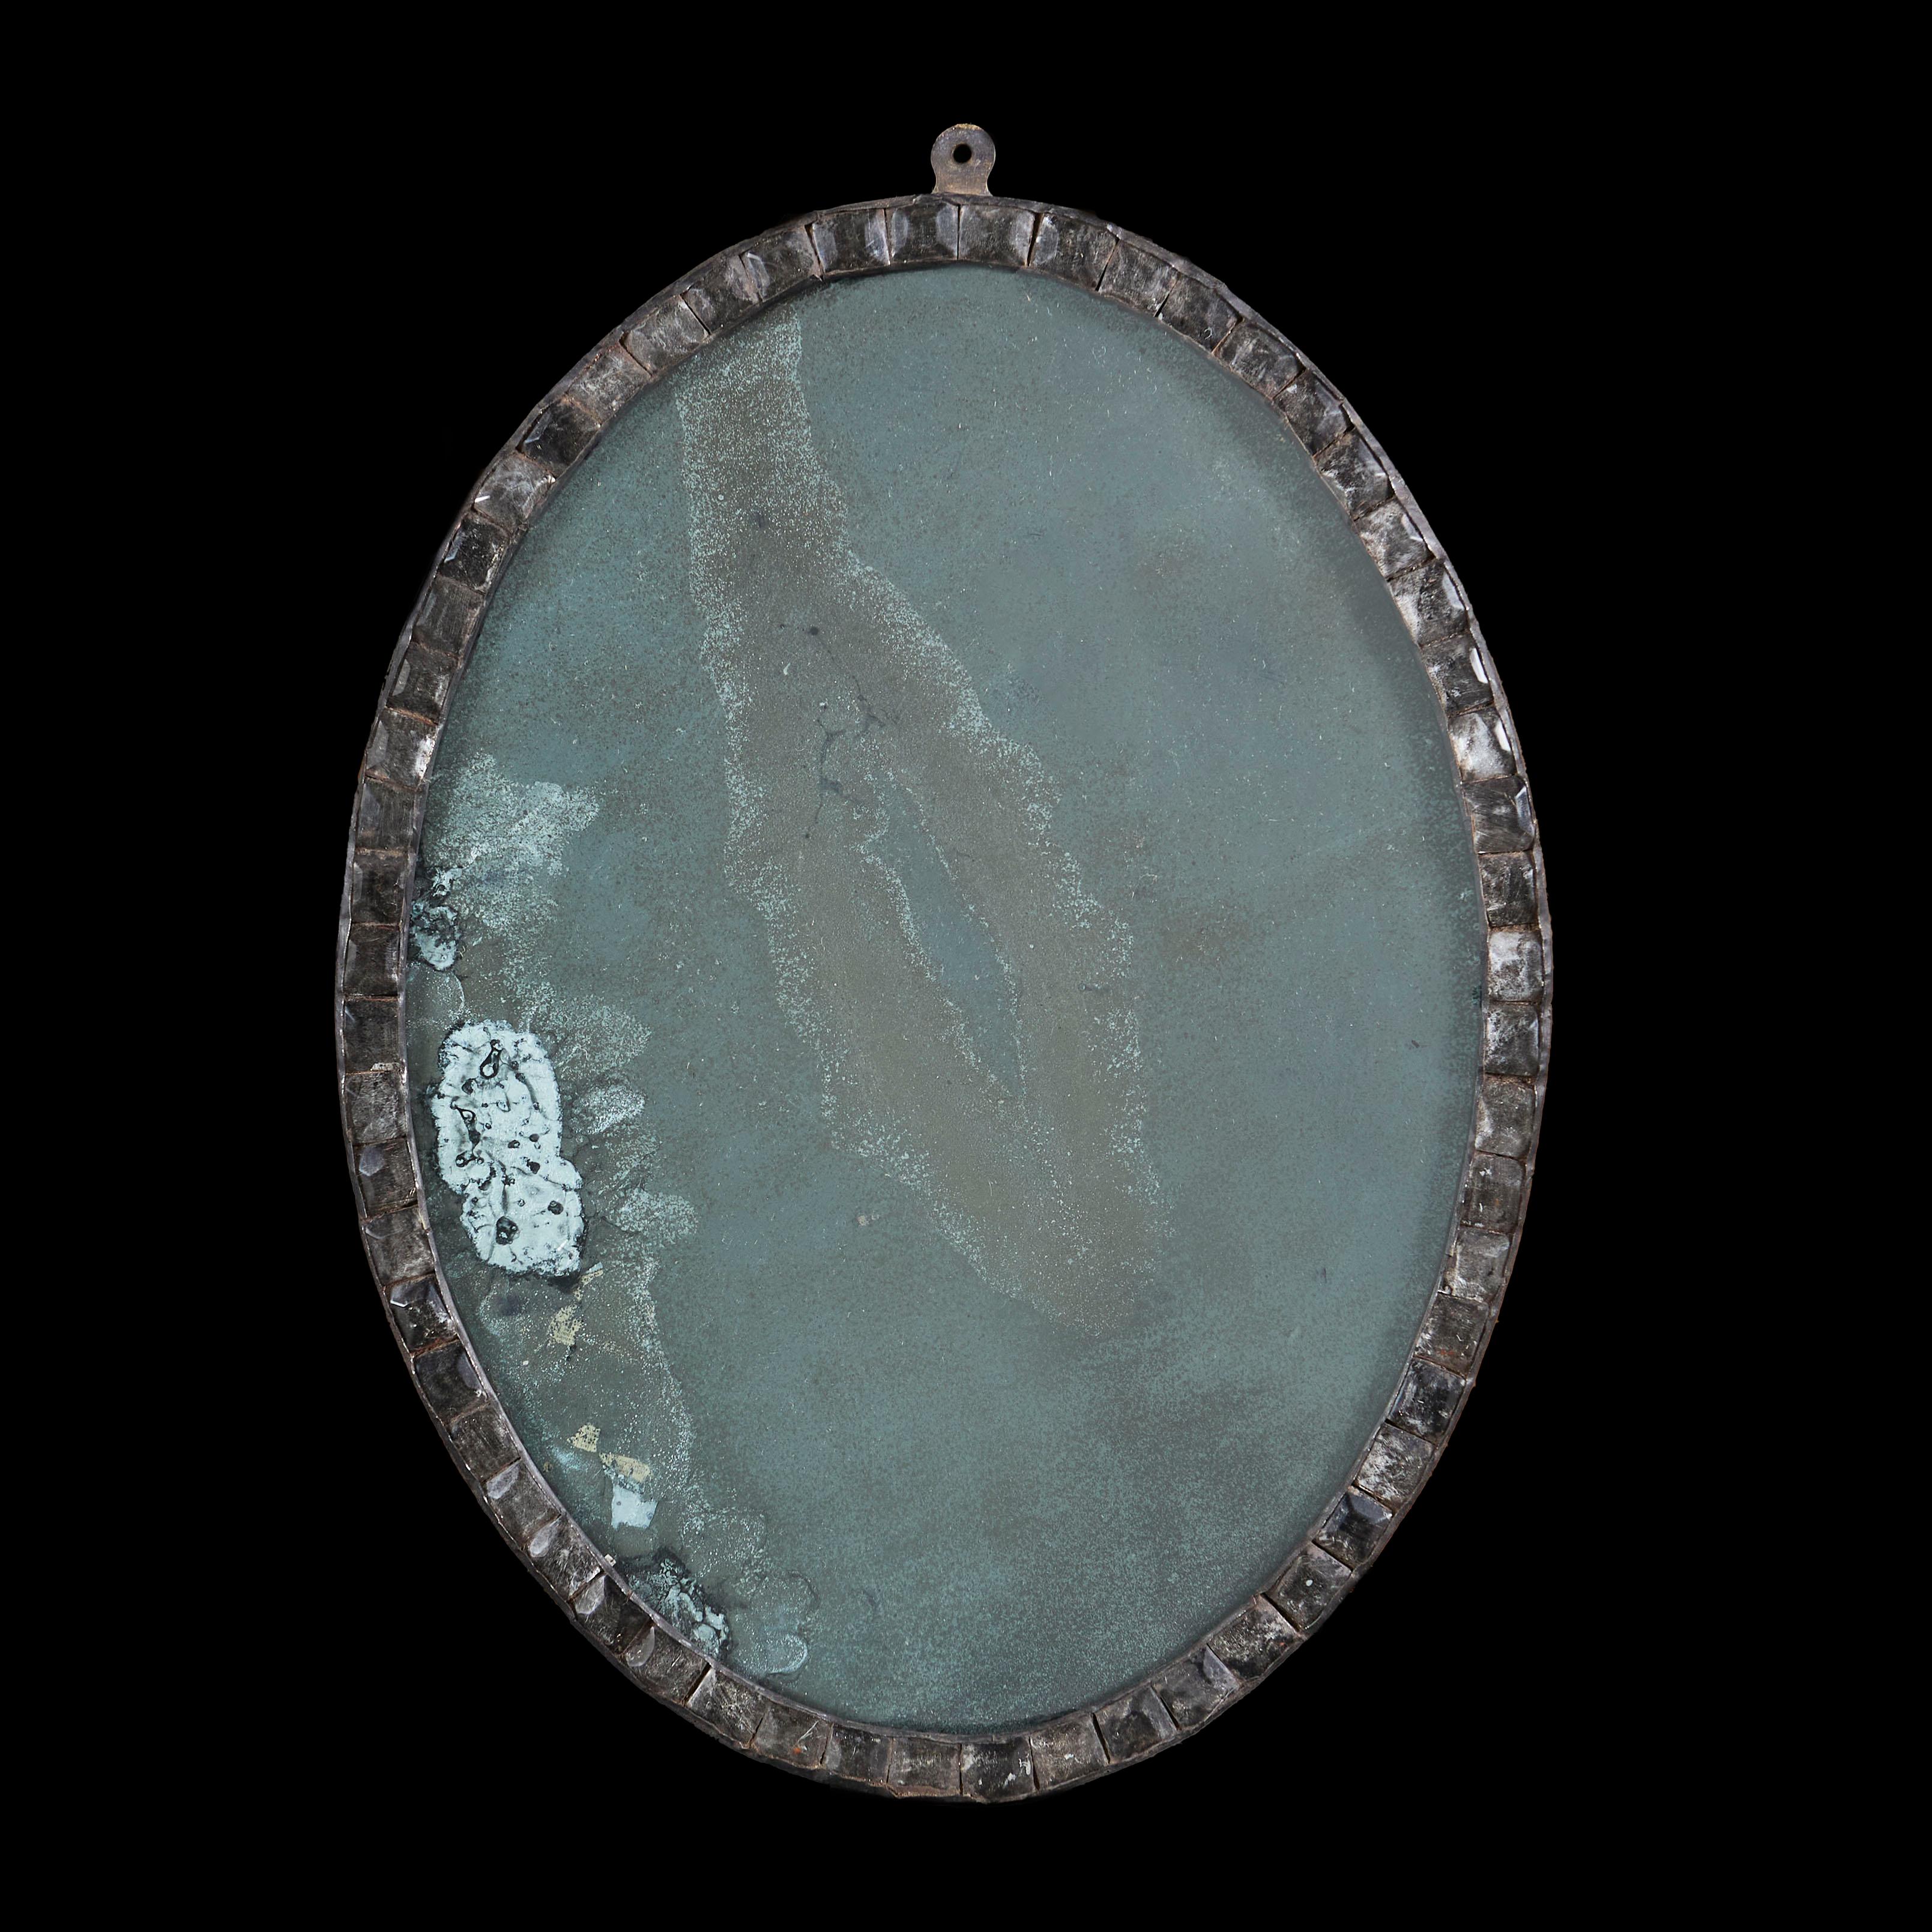 Ireland, circa 1900

An early twentieth century oval Irish mirror with a border comprised of clear cut glass beads with heavily oxidised mercury mirror plate.

Height 60.00cm
Width 45.00cm
Depth 4.00cm